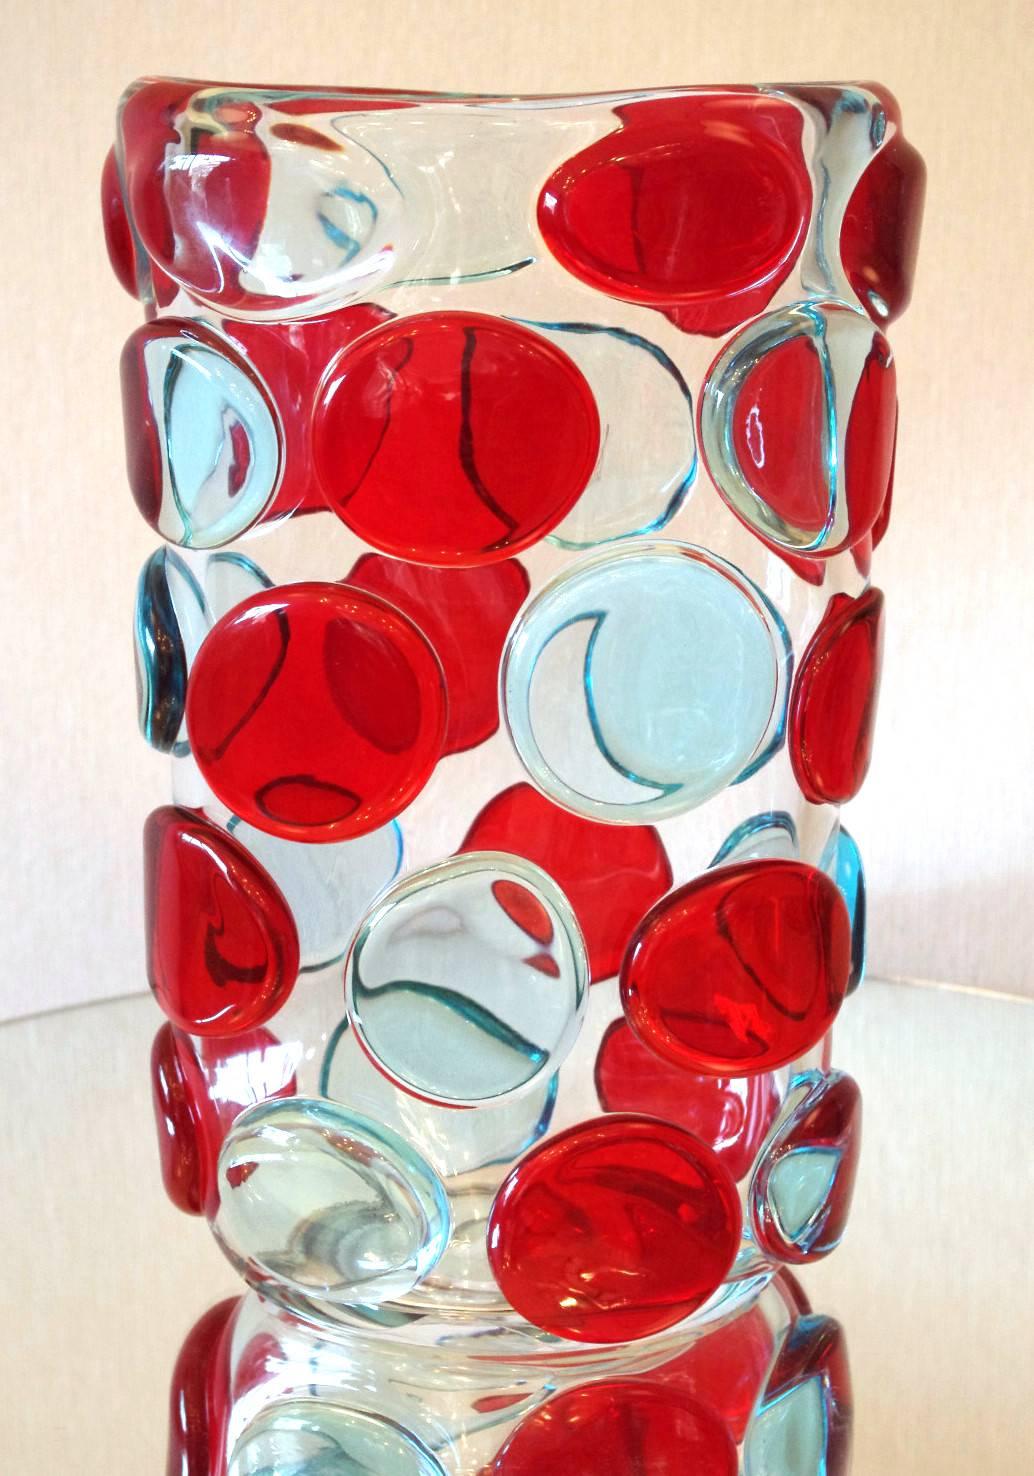 Beautiful vase with clear Murano glass body and decorative red and light blue Murano glass buttons by Camozzo and signed on the base
Made in Italy in the 1970’s
Height: 13.5 inches / Width: 9 inches / Depth: 5.5 inches
1 in stock in Palm Springs